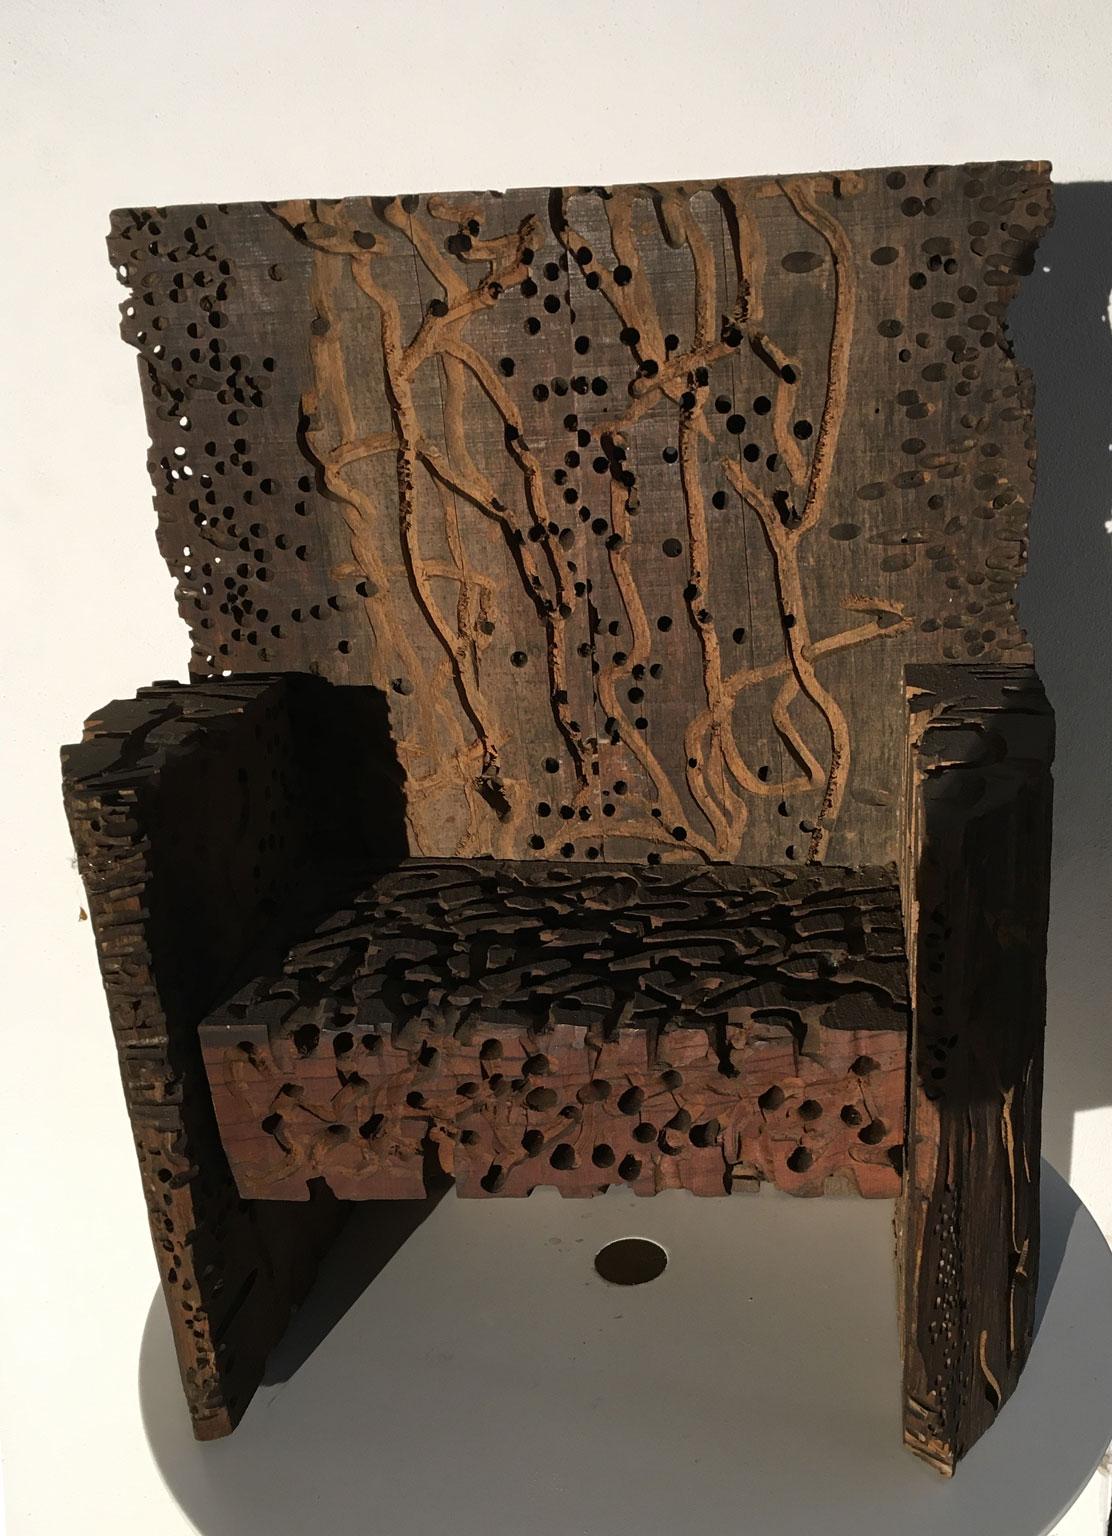 Post-Modern 1985 Italy Wooden Abstract Sculpture by Urano Palma Grande Trono Big Throne For Sale